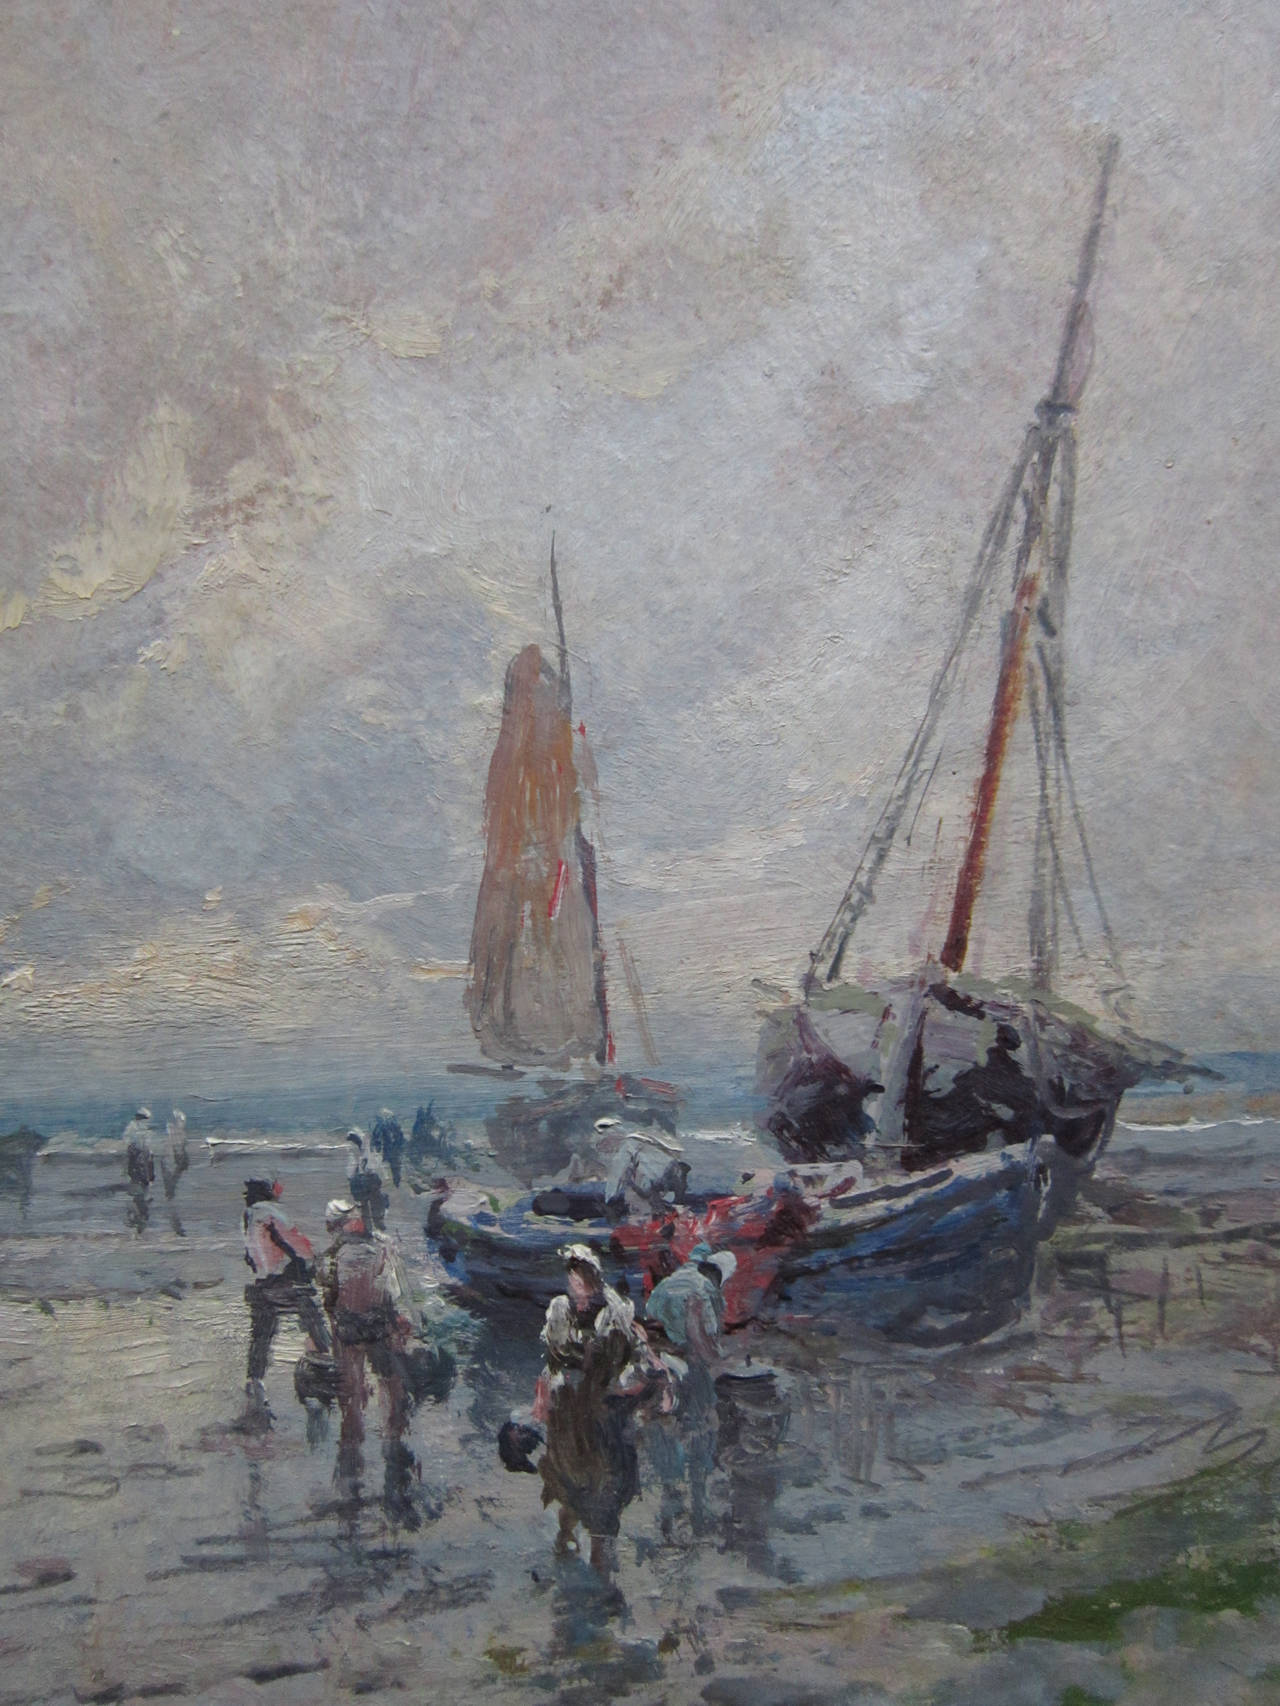 This small painting is titled on the verso in pen and depicts a sea shore with fishing vessels and people. Diehl was born in England and moved to the US in 1891. The actual painting measures 8